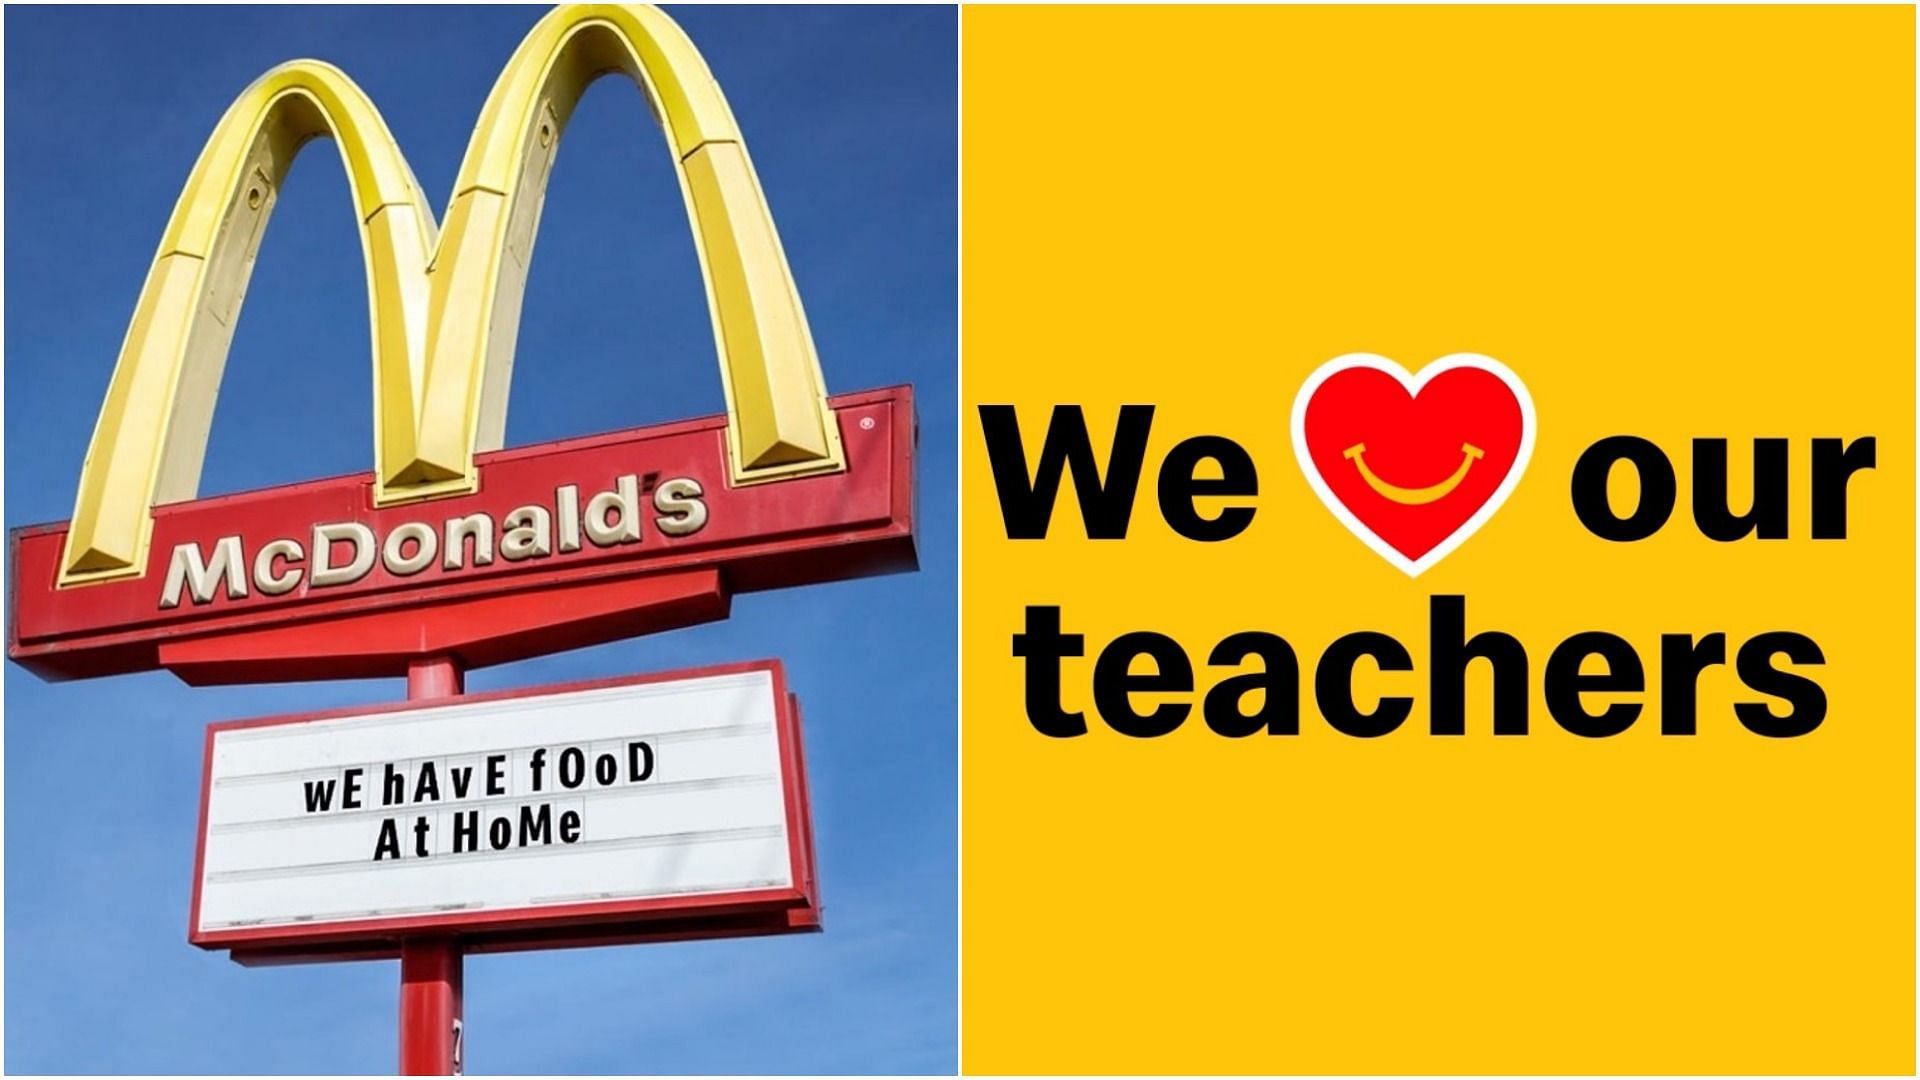 McDonald's celebrates National Teachers' Day by offering free drinks